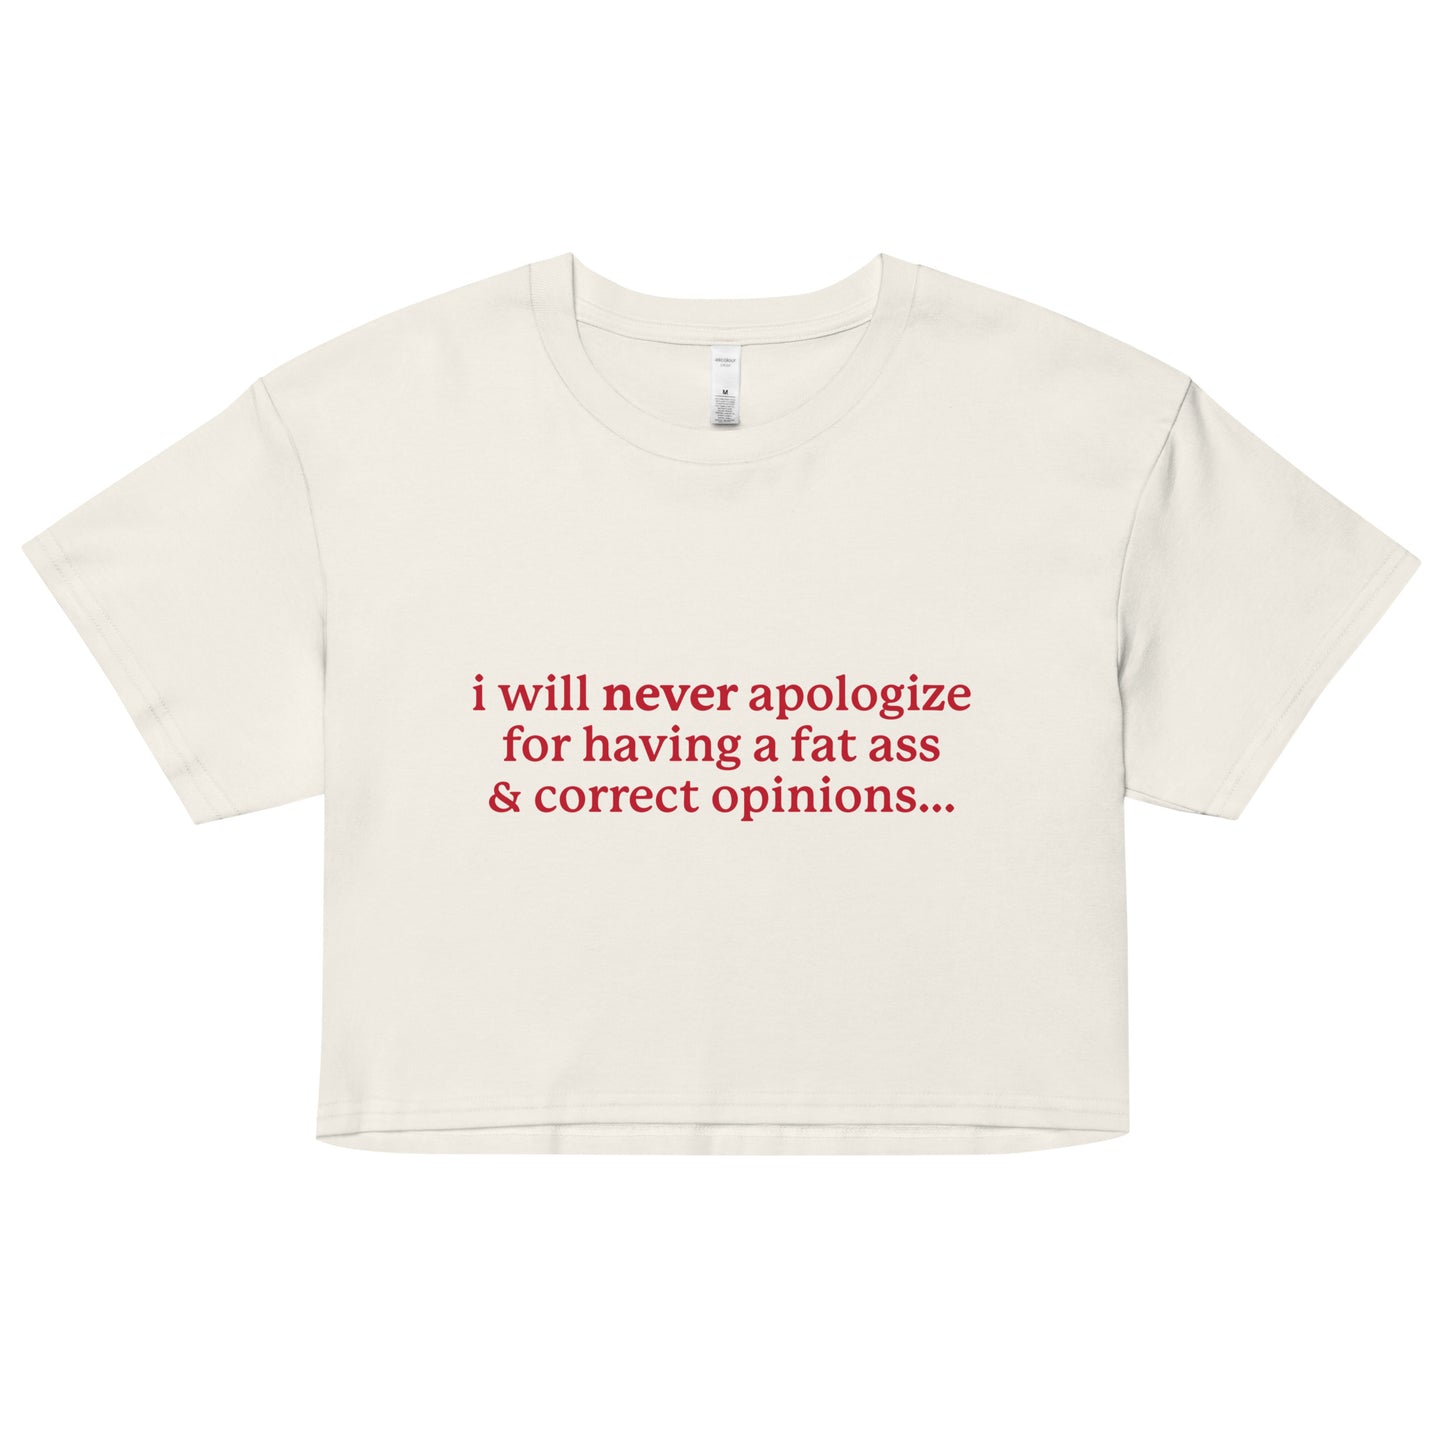 I Will Never Apologize (Fat Ass & Correct Opinions) crop top